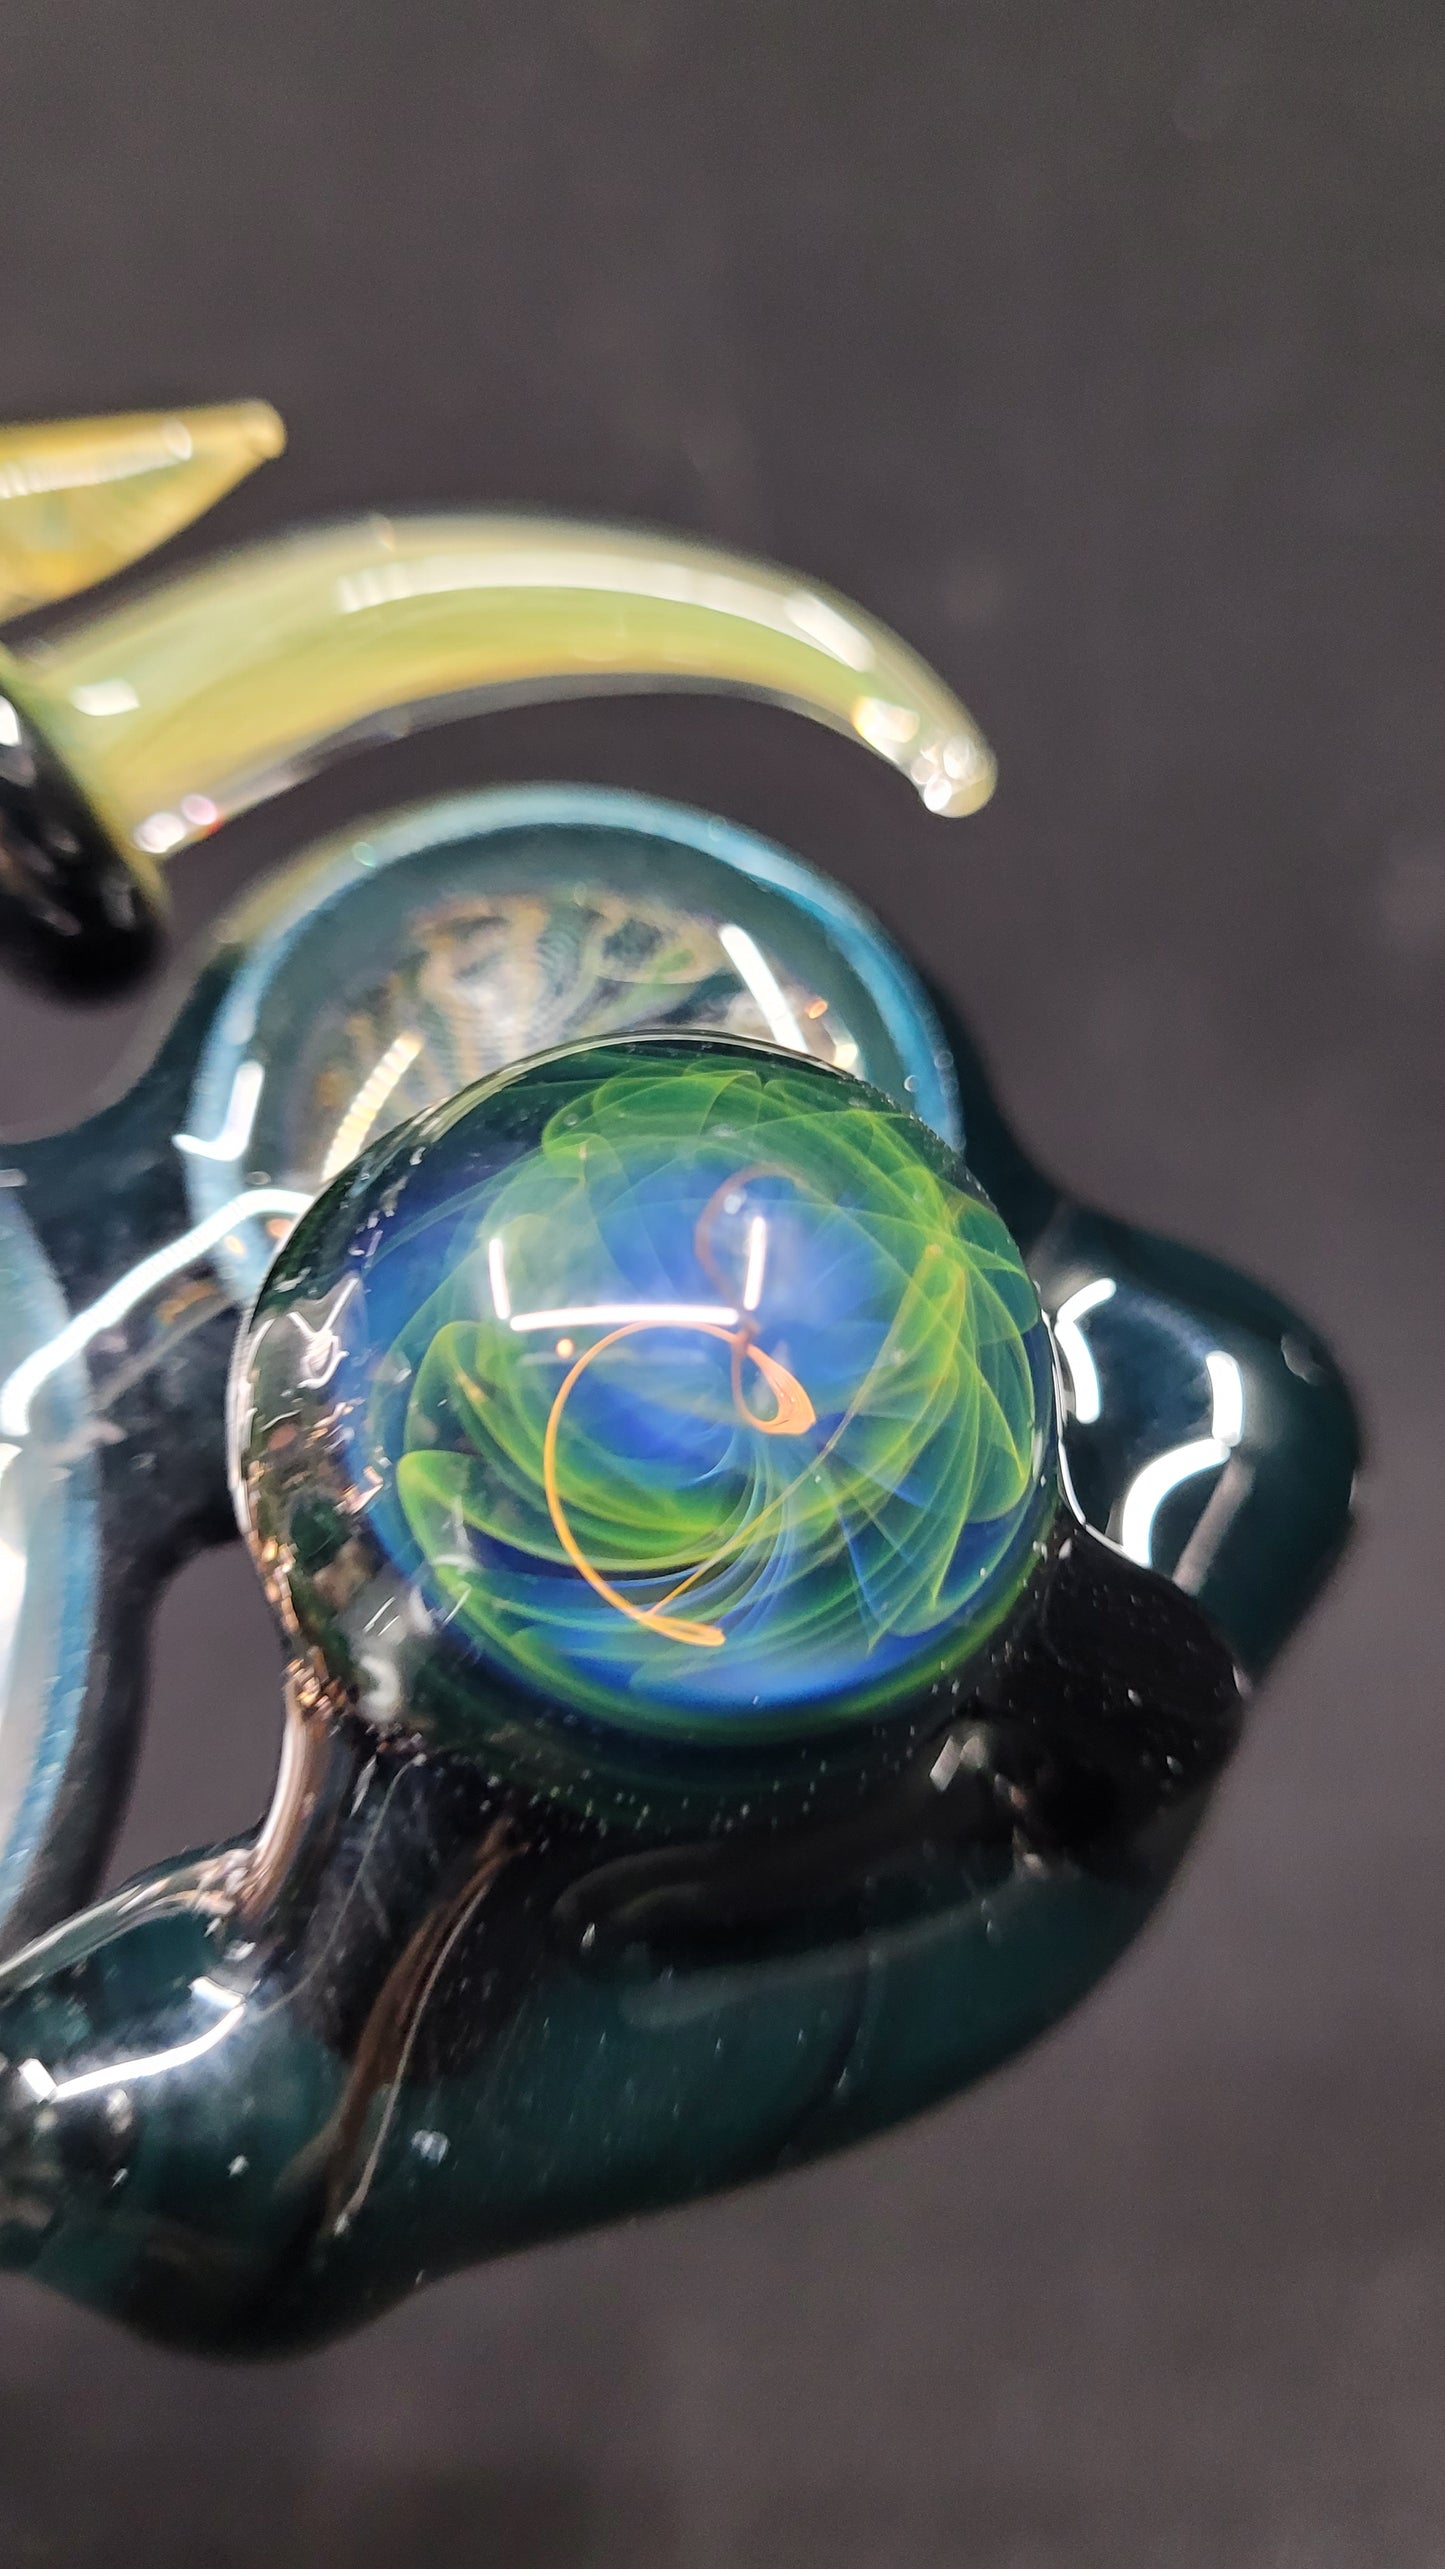 Big Z 10mm Worked Pendant Rig W/ Center Mib and Opal Carb Cap